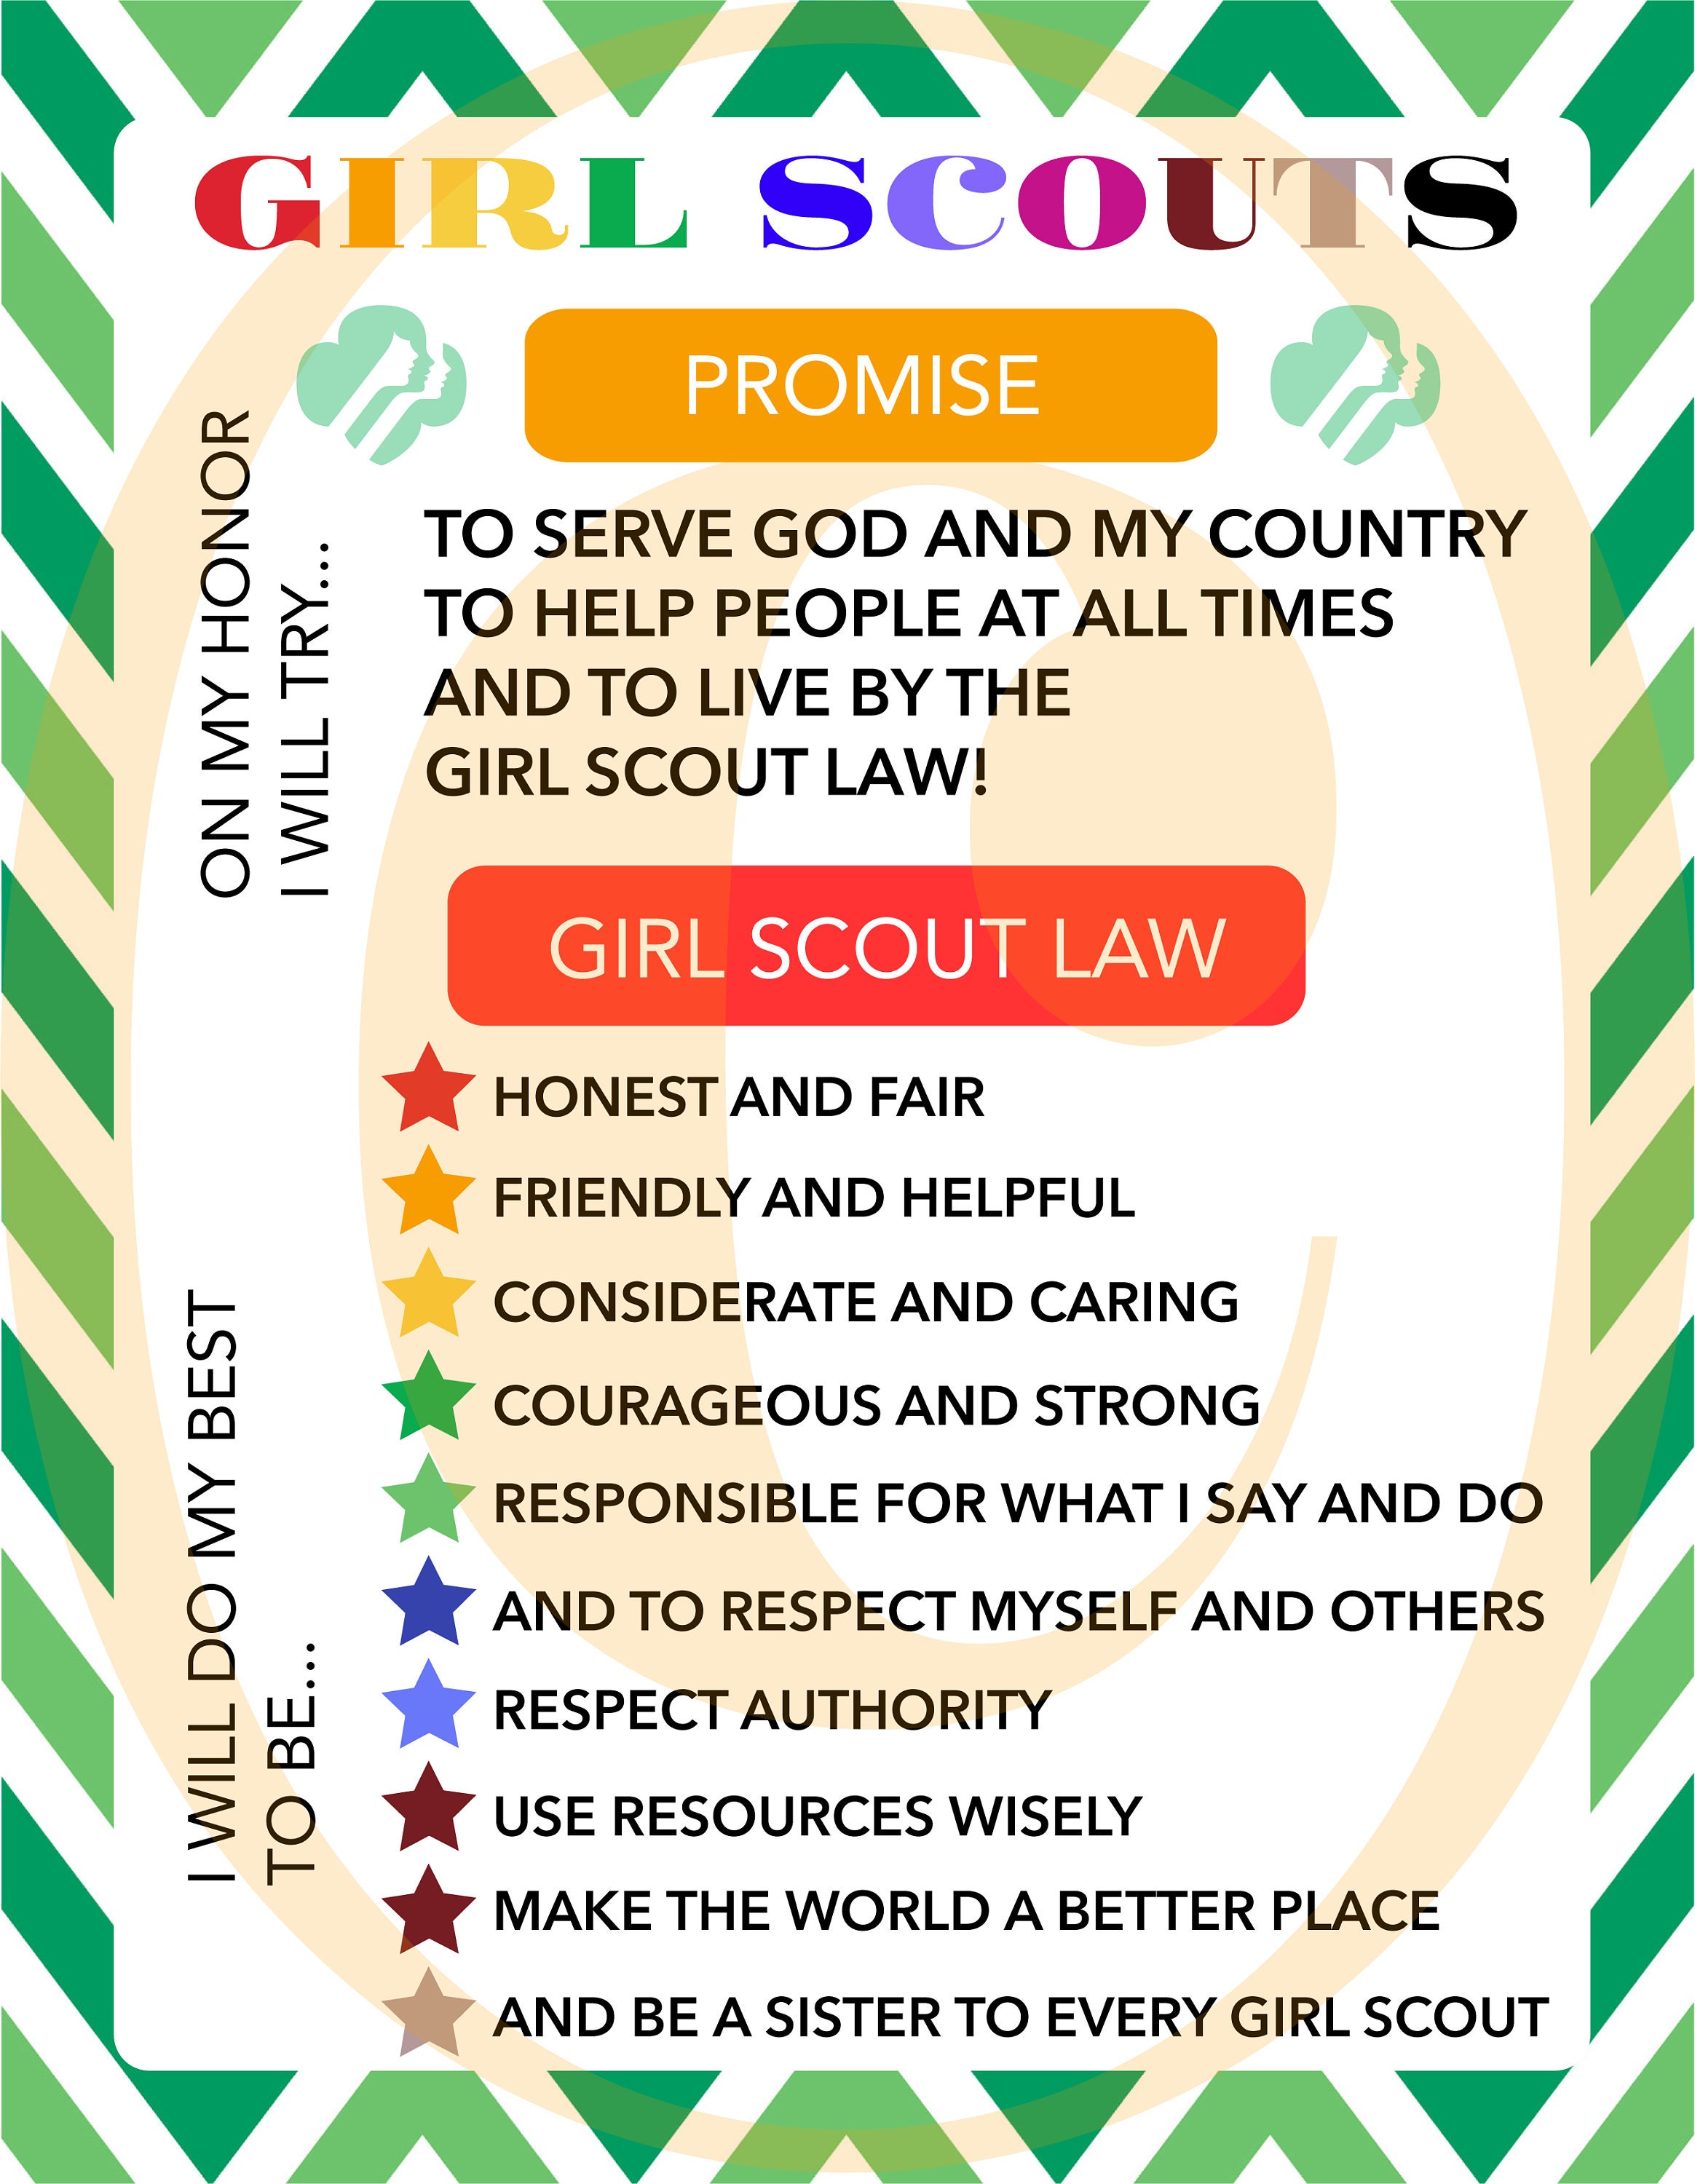 girl-scout-promise-and-law-printable-daisy-petals-handout-etsy-girl